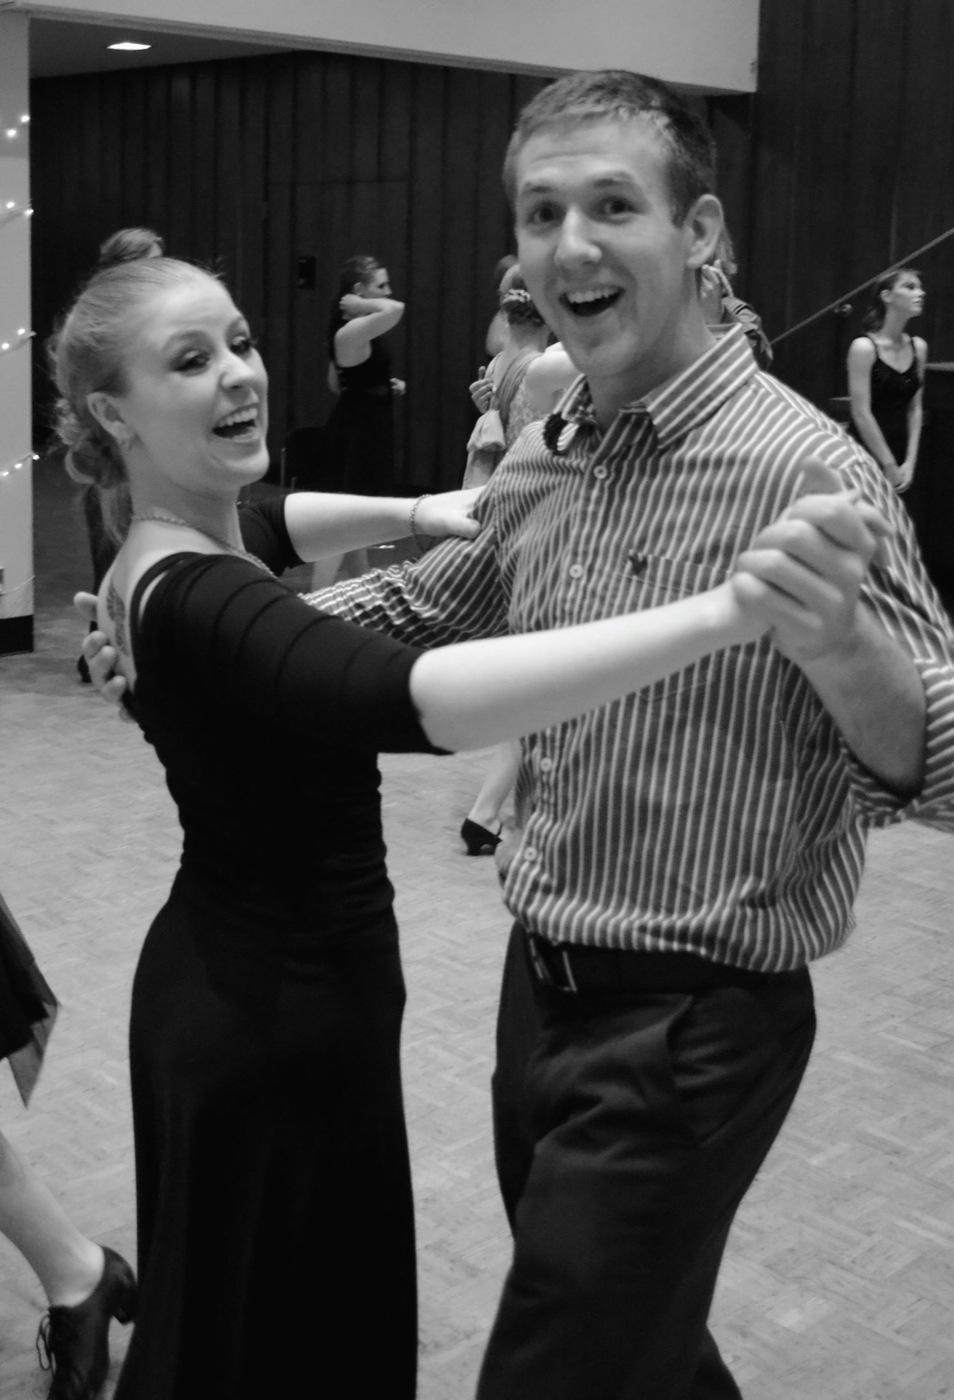 Mary Beth Beckman and Colin Frances social dancing